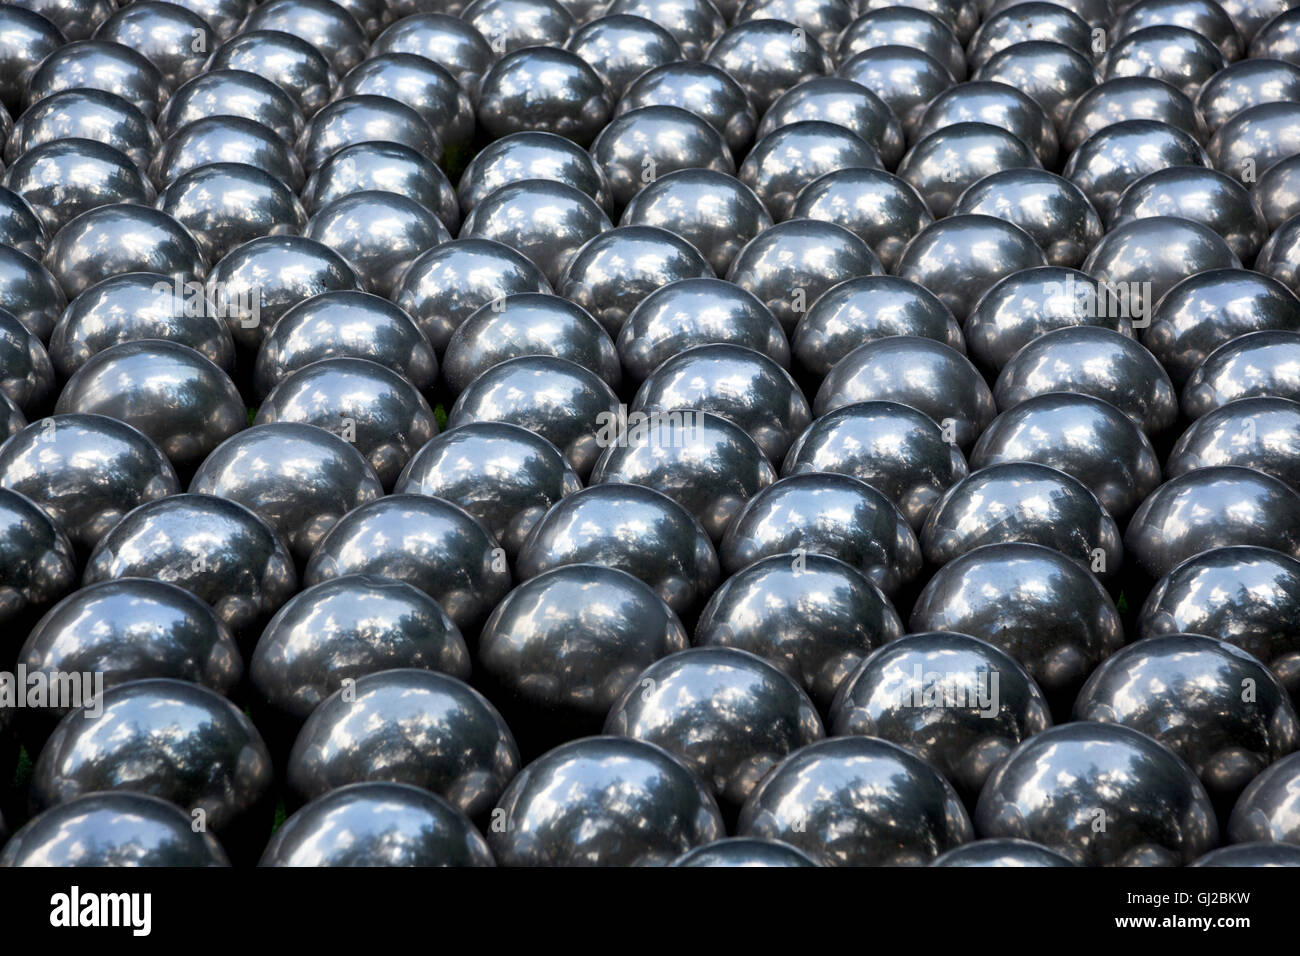 Narcissus Garden by Yayoi Kusama, stainless steel spheres, 1966, at Victoria Miro gallery in 2016, London, UK Stock Photo